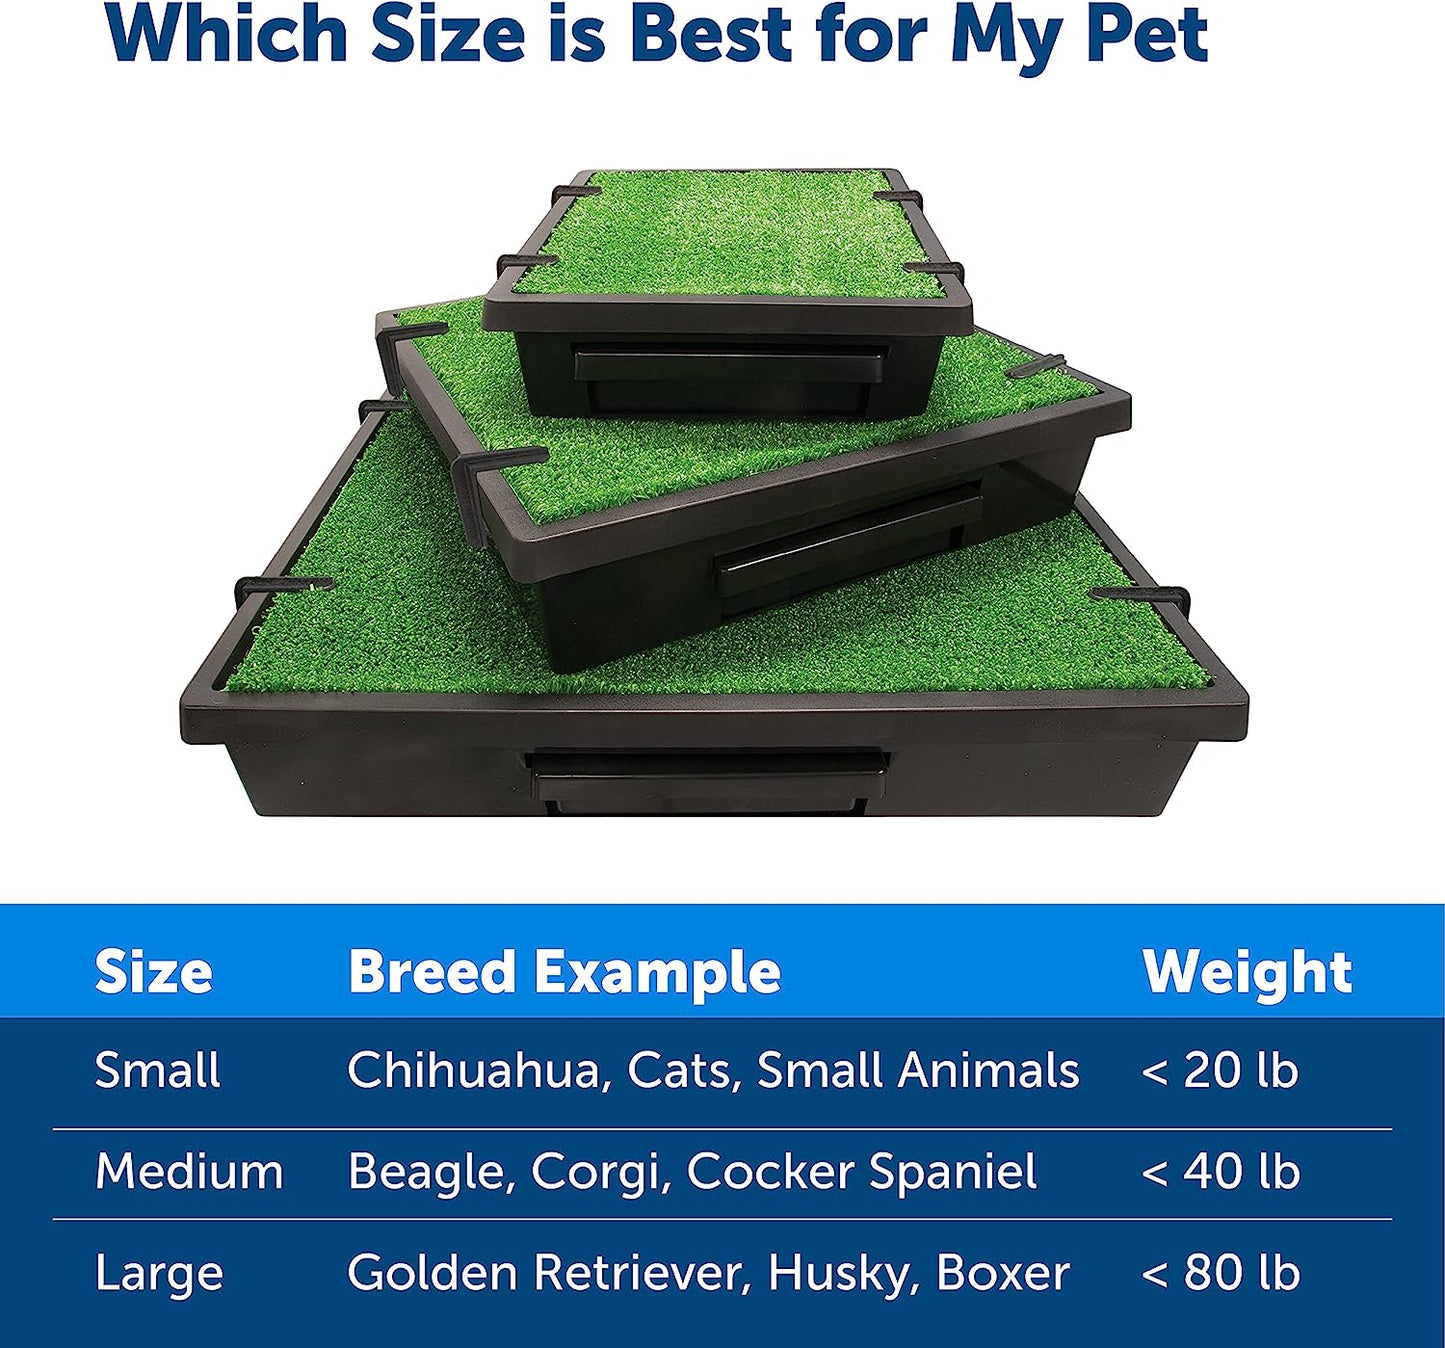 Large Portable Toilet for Dogs and Pets